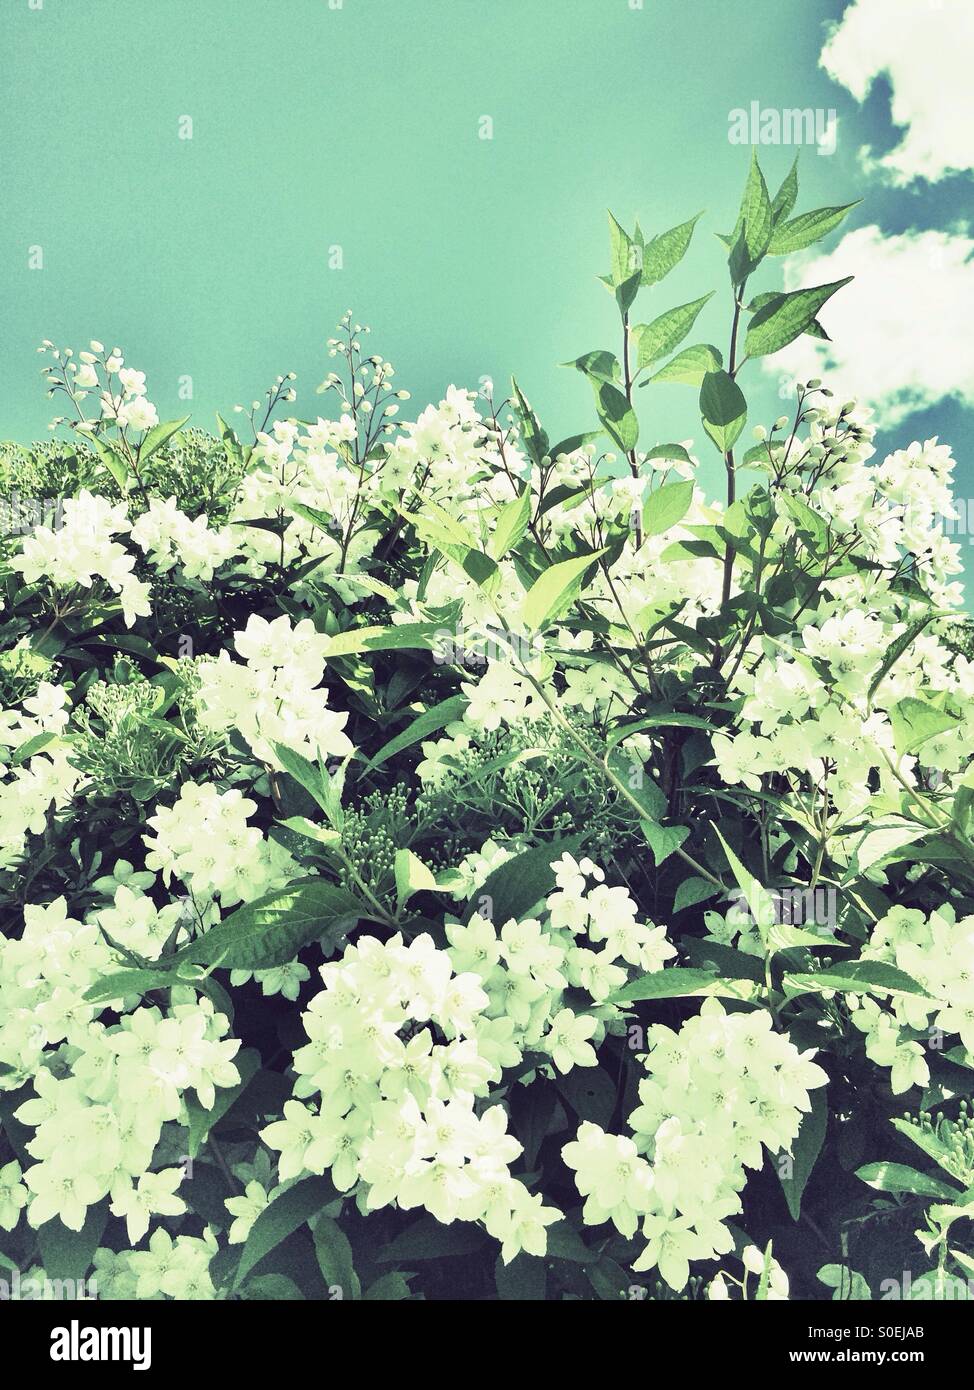 White flowers with green leaves shrub Stock Photo